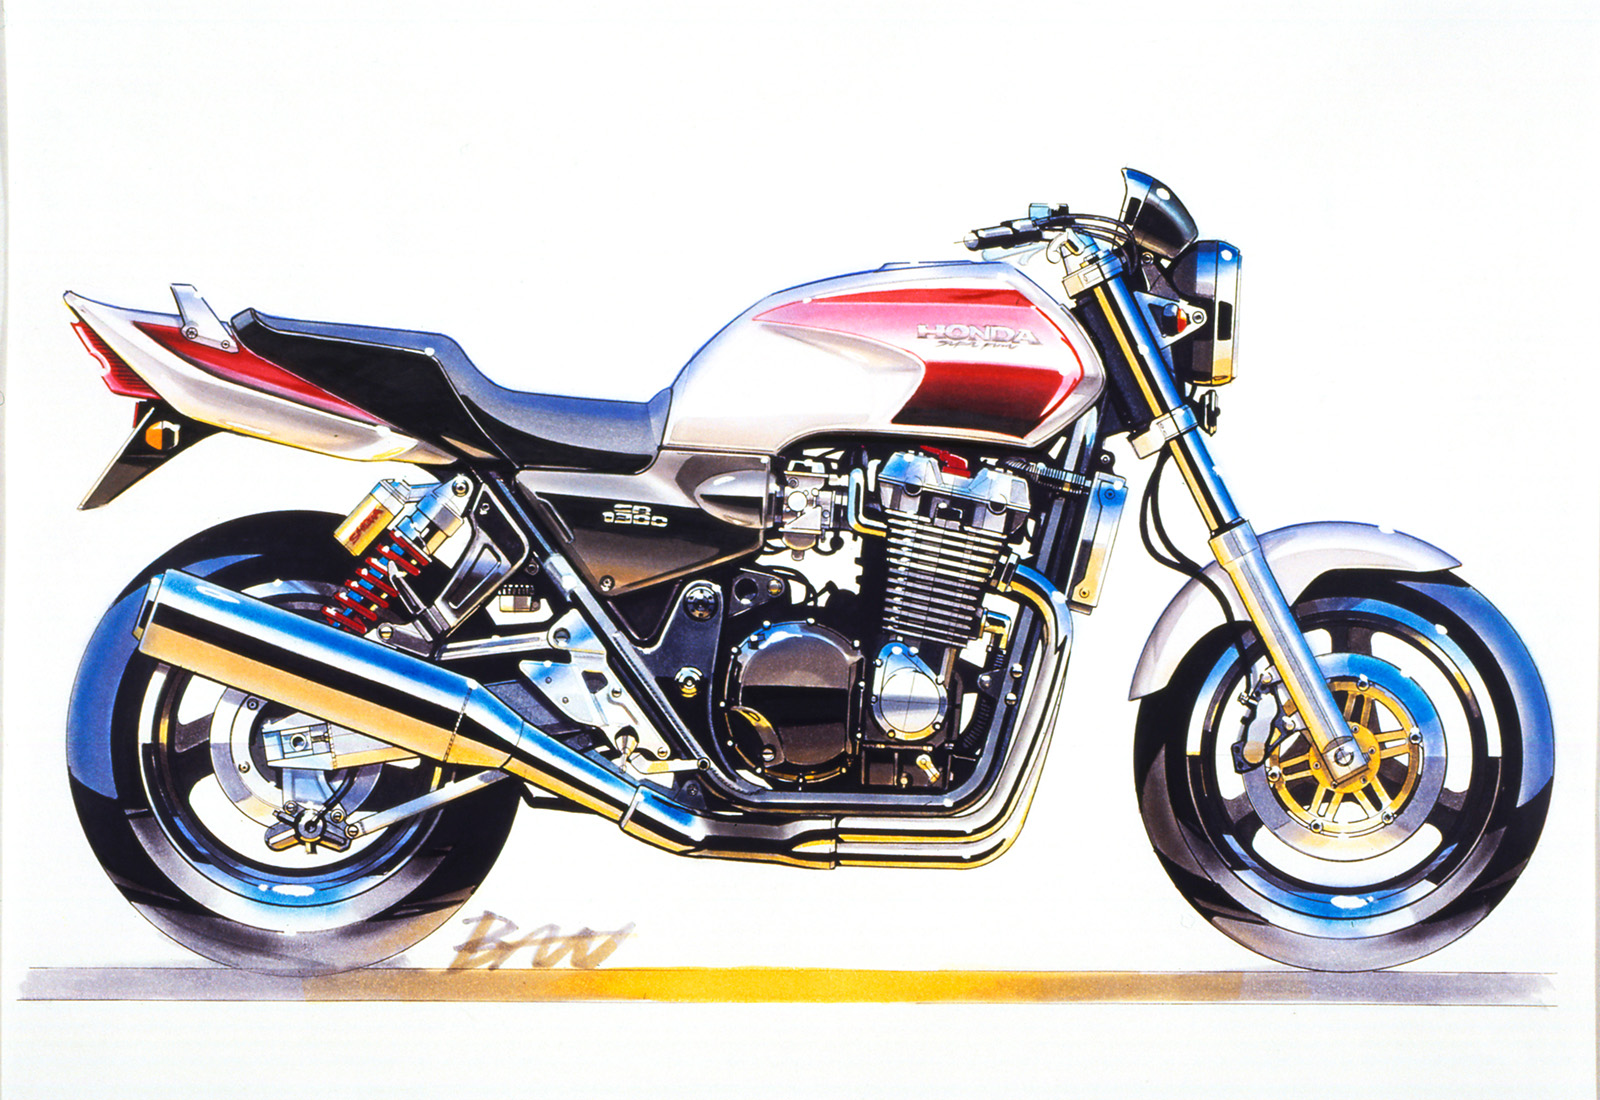 CB1300 SUPER FOUR（1998年）ファイナルスケッチ